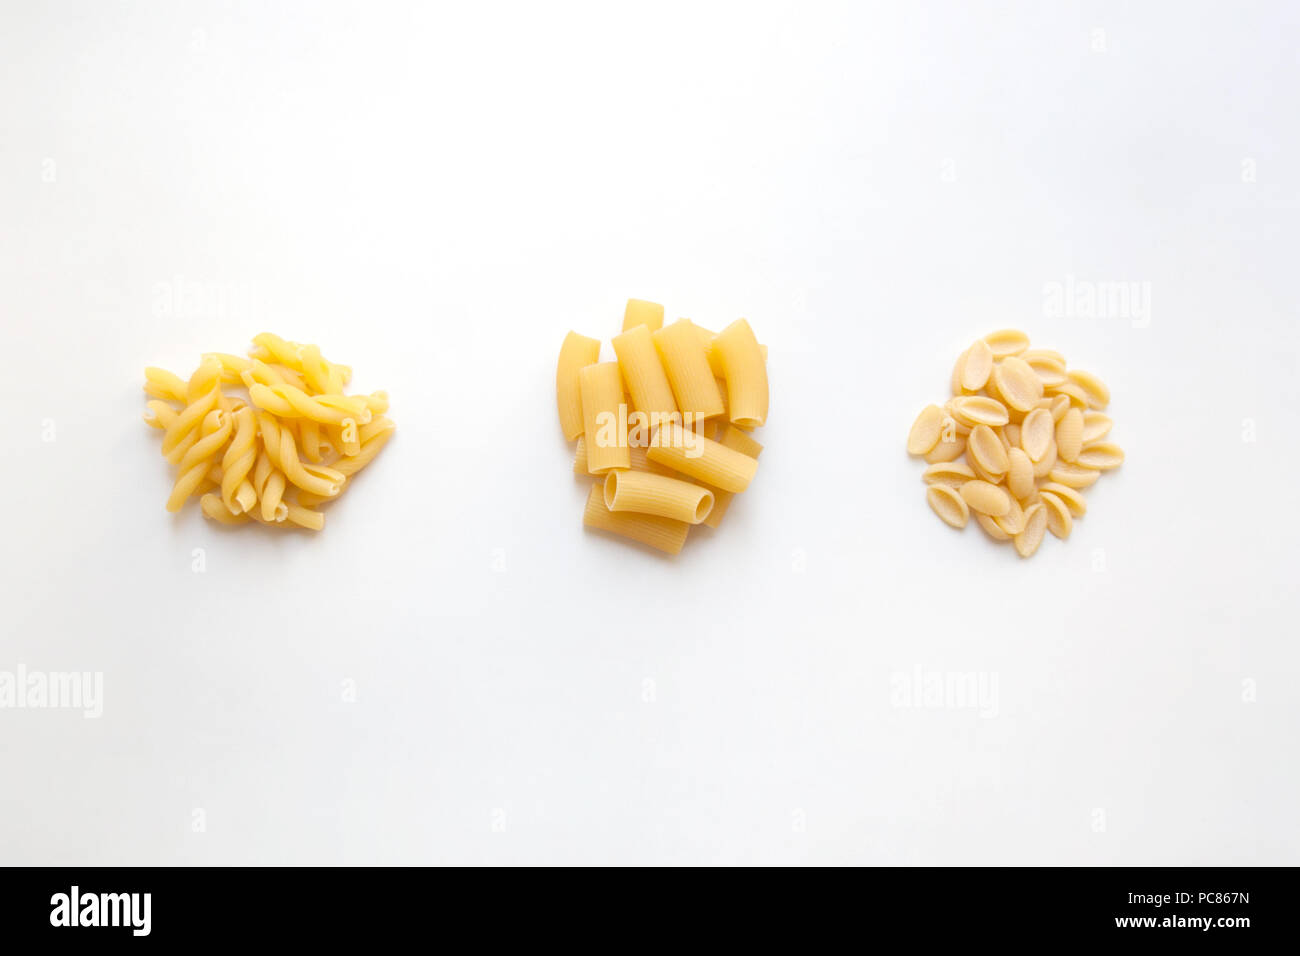 Three heaps of raw wheat pasta with various shapes isolated on white background Stock Photo